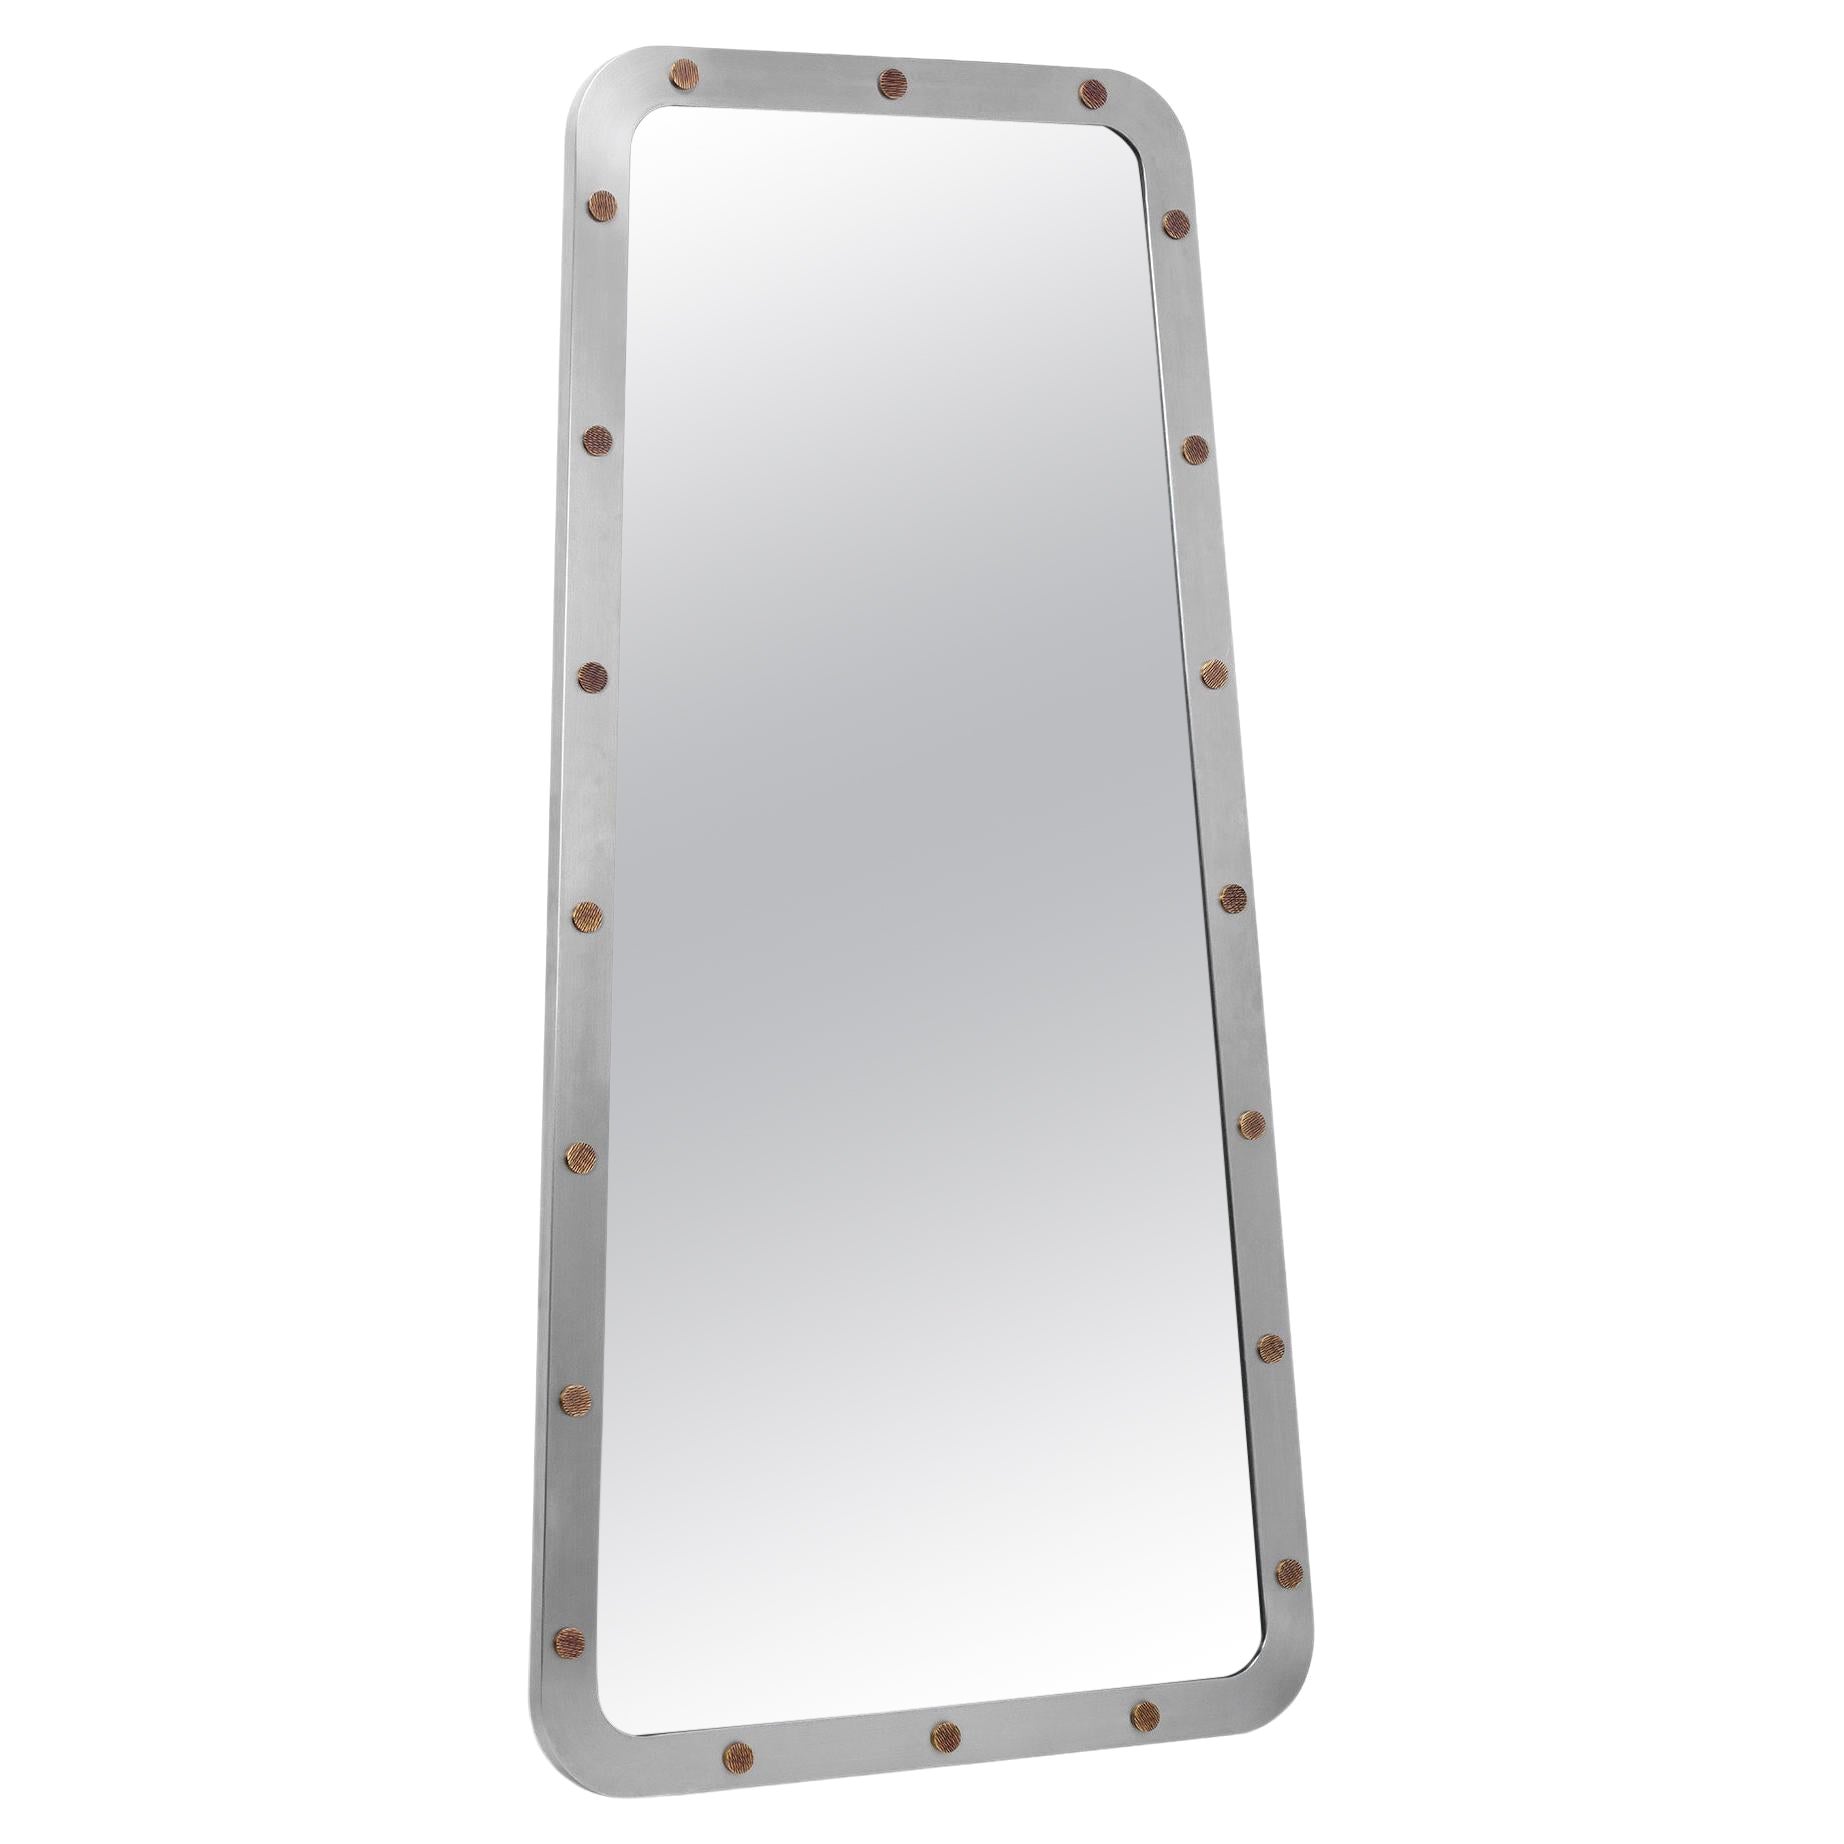 Cluster Mirror, in Brushed Stainless Steel, Handcrafted in Portugal by Duistt